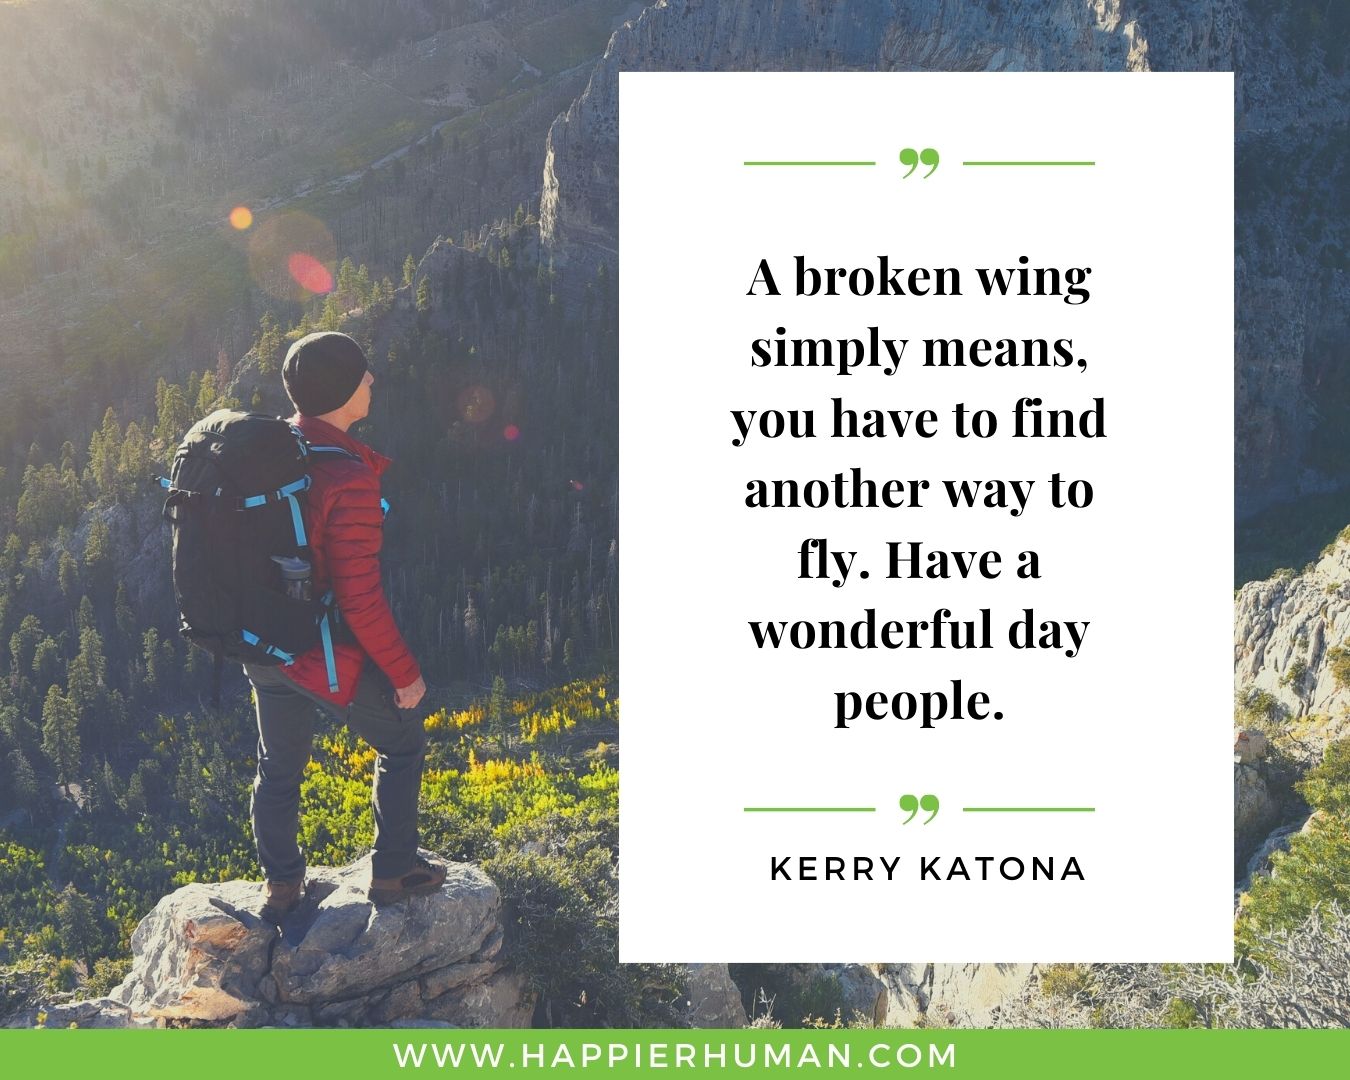 Great Day Quotes - “A broken wing simply means, you have to find another way to fly. Have a wonderful day people.” – Kerry Katona